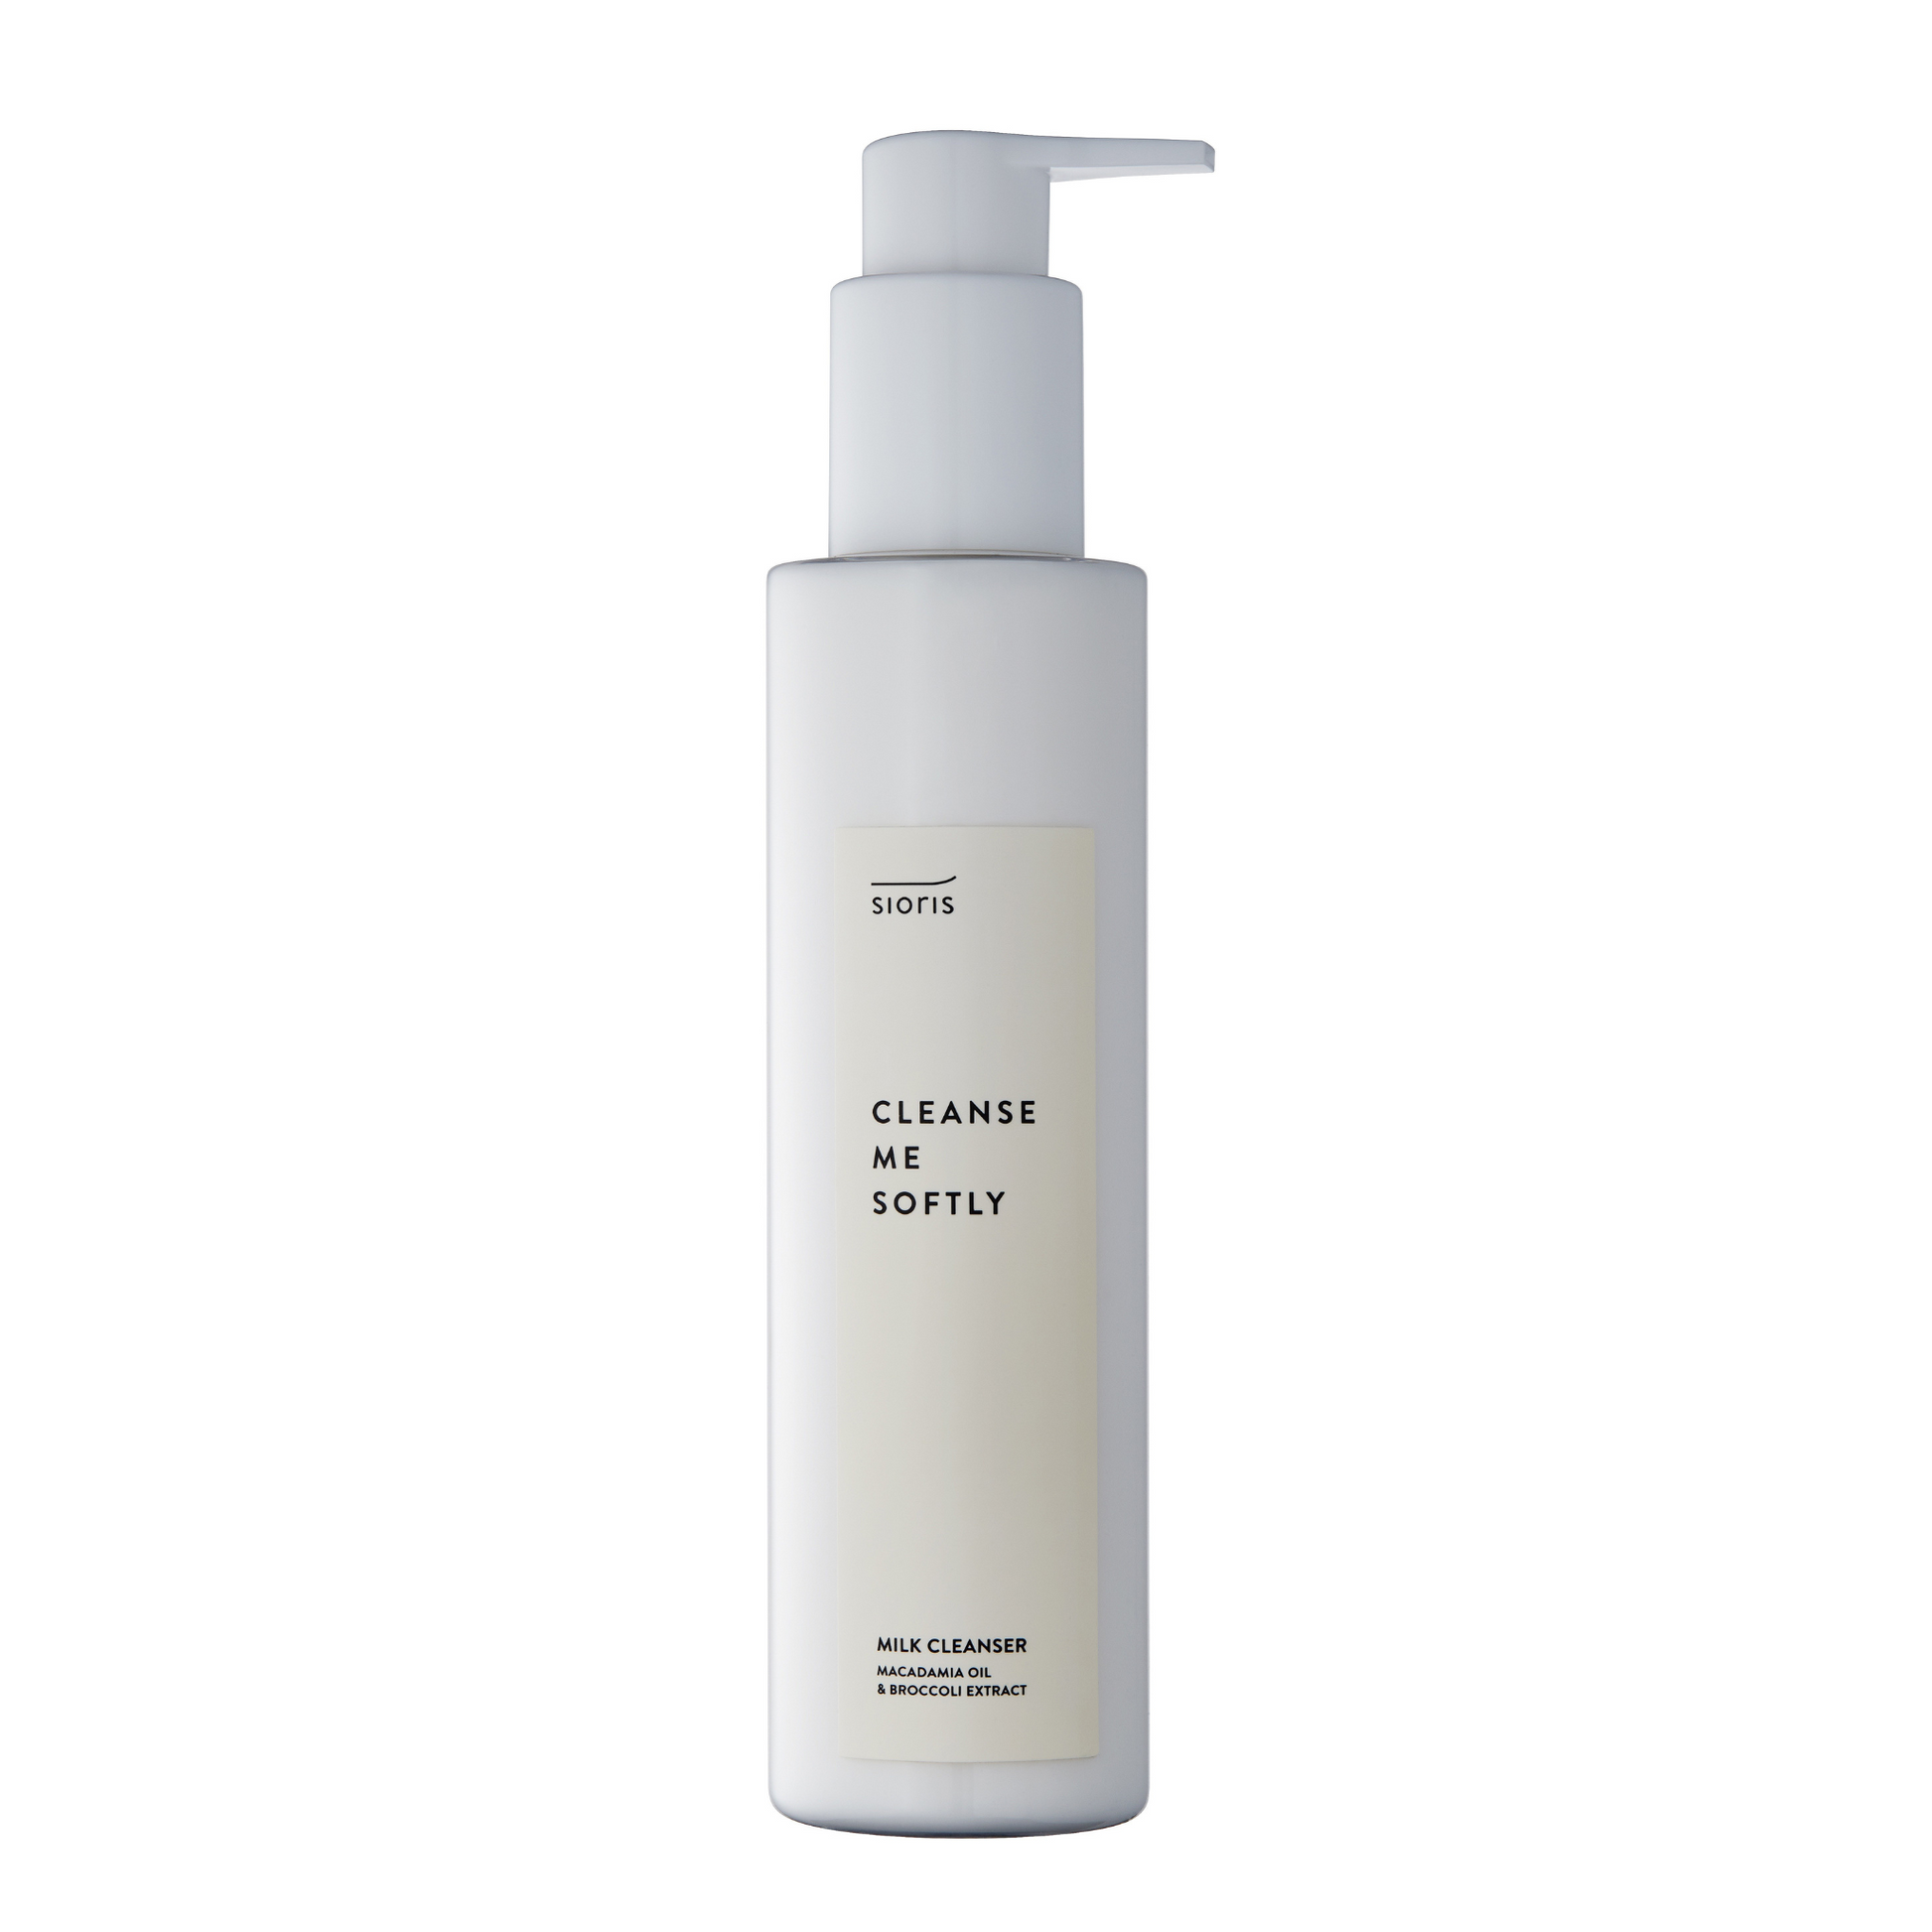 This non-oily cleansing milk is a best-seller in Korea and is the perfect cleanser for sensitive or dry skin.